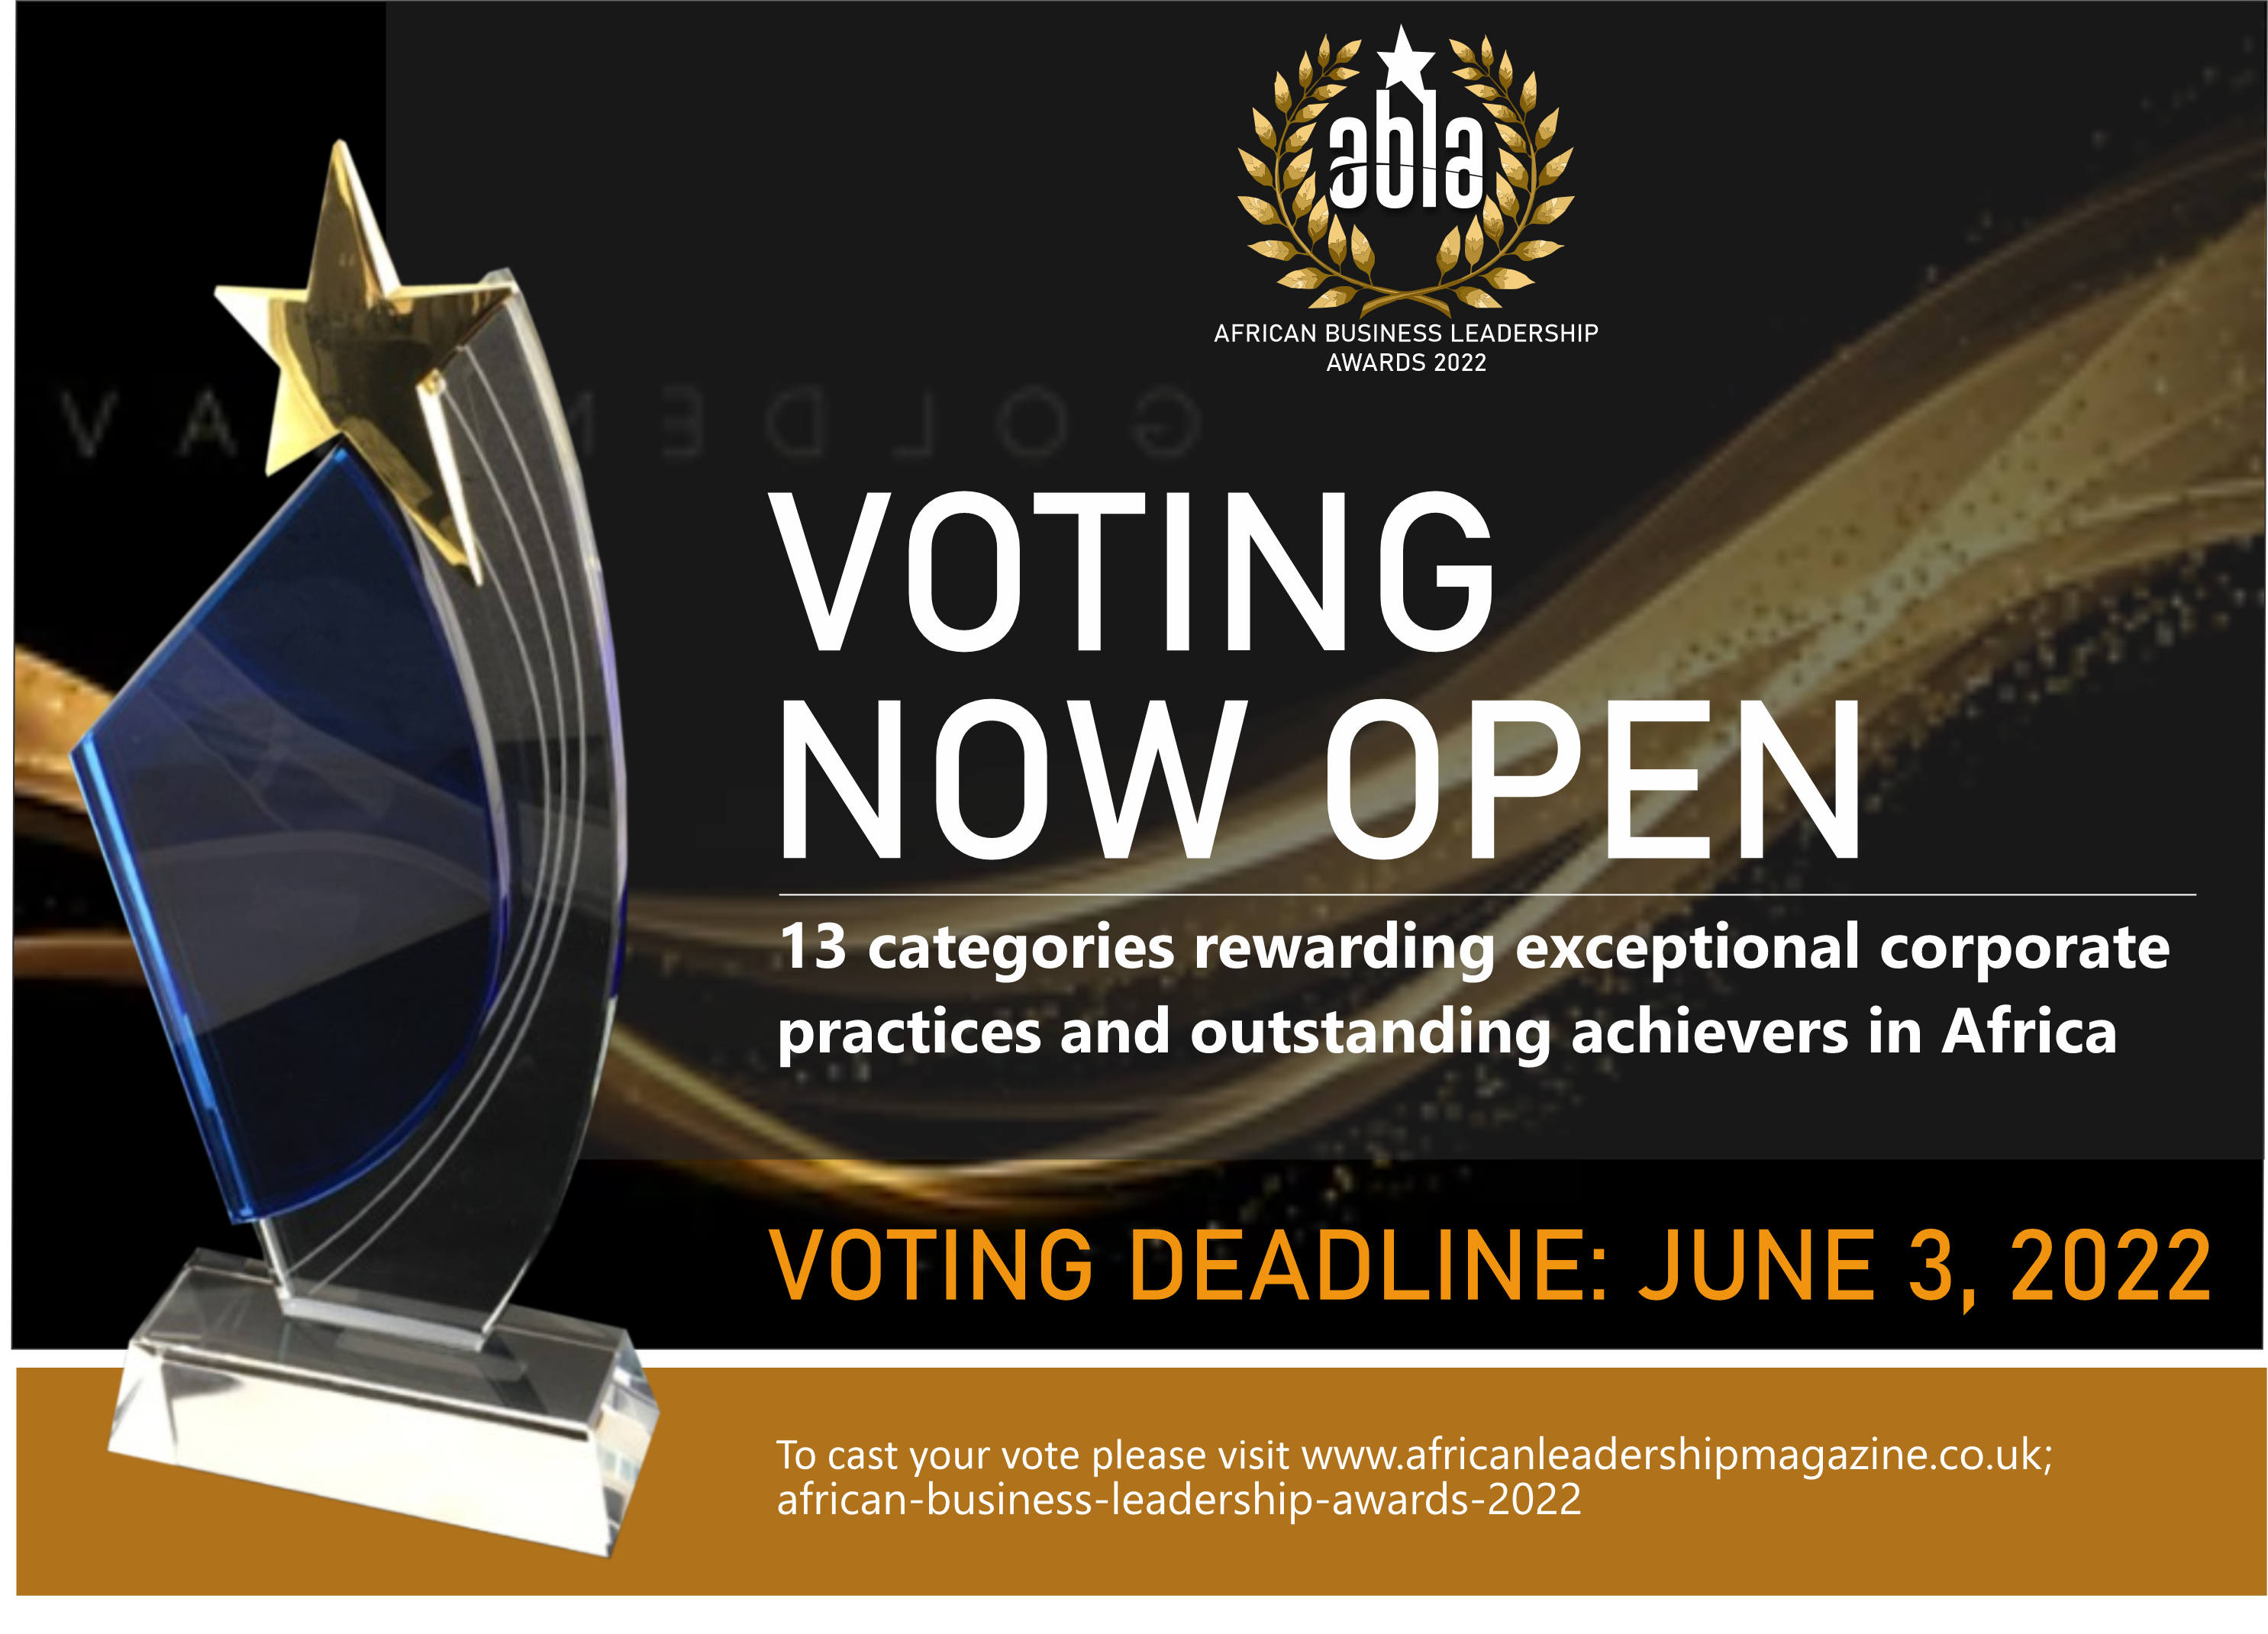 PUBLIC VOTING FOR AFRICAN BUSINESS LEADERSHIP AWARDS (ABLA) 2022 COMMENCES ONLINE